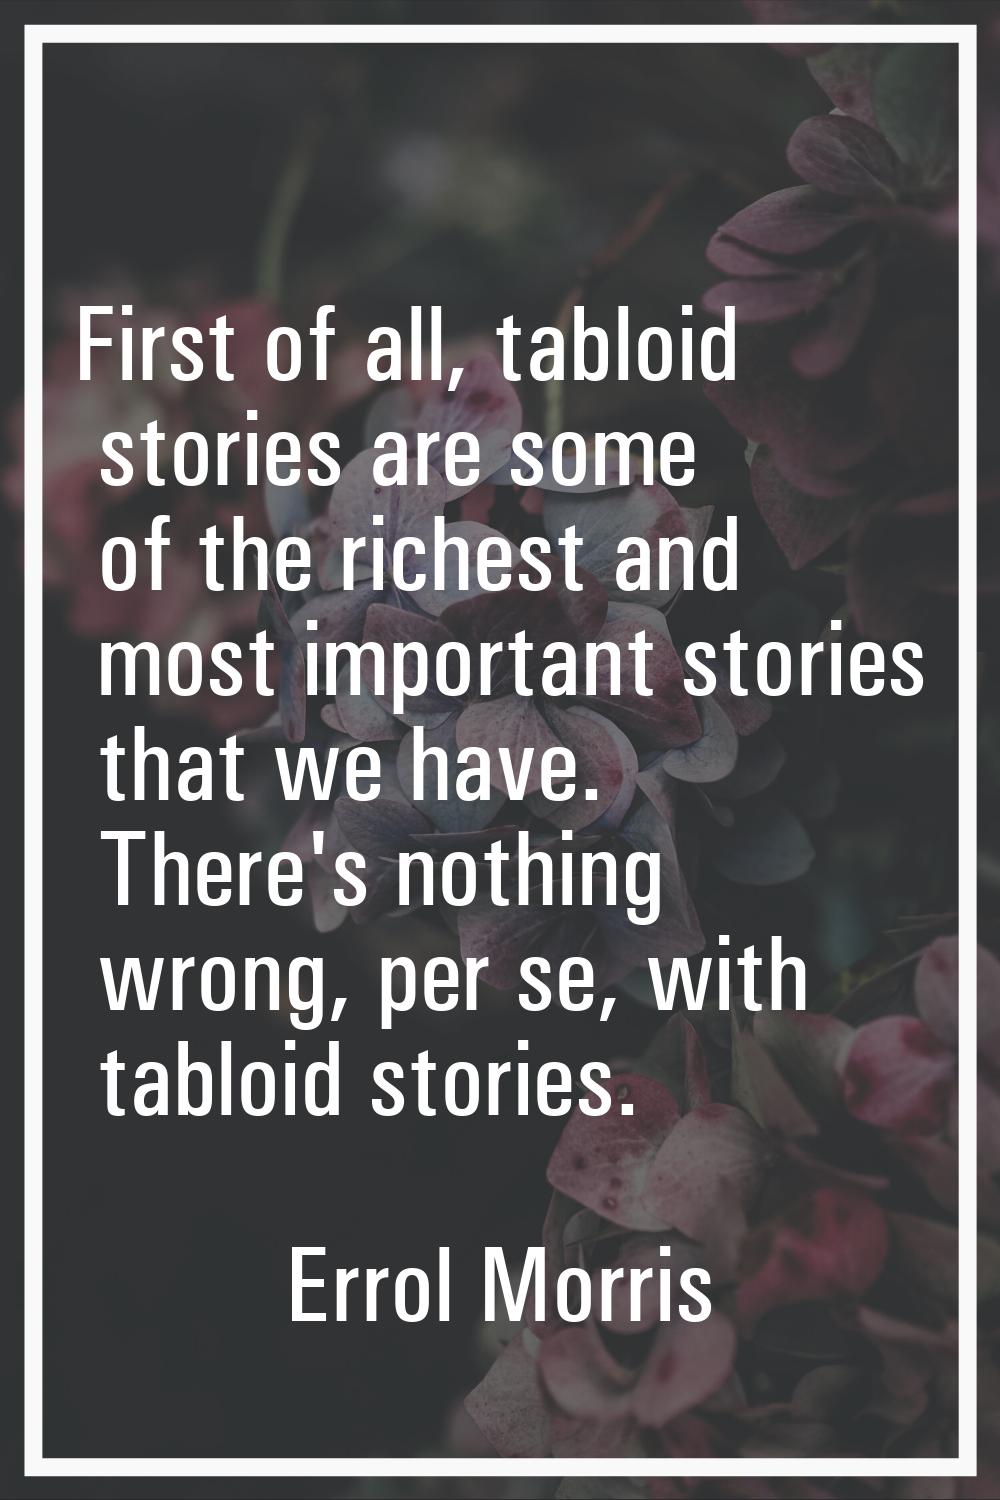 First of all, tabloid stories are some of the richest and most important stories that we have. Ther